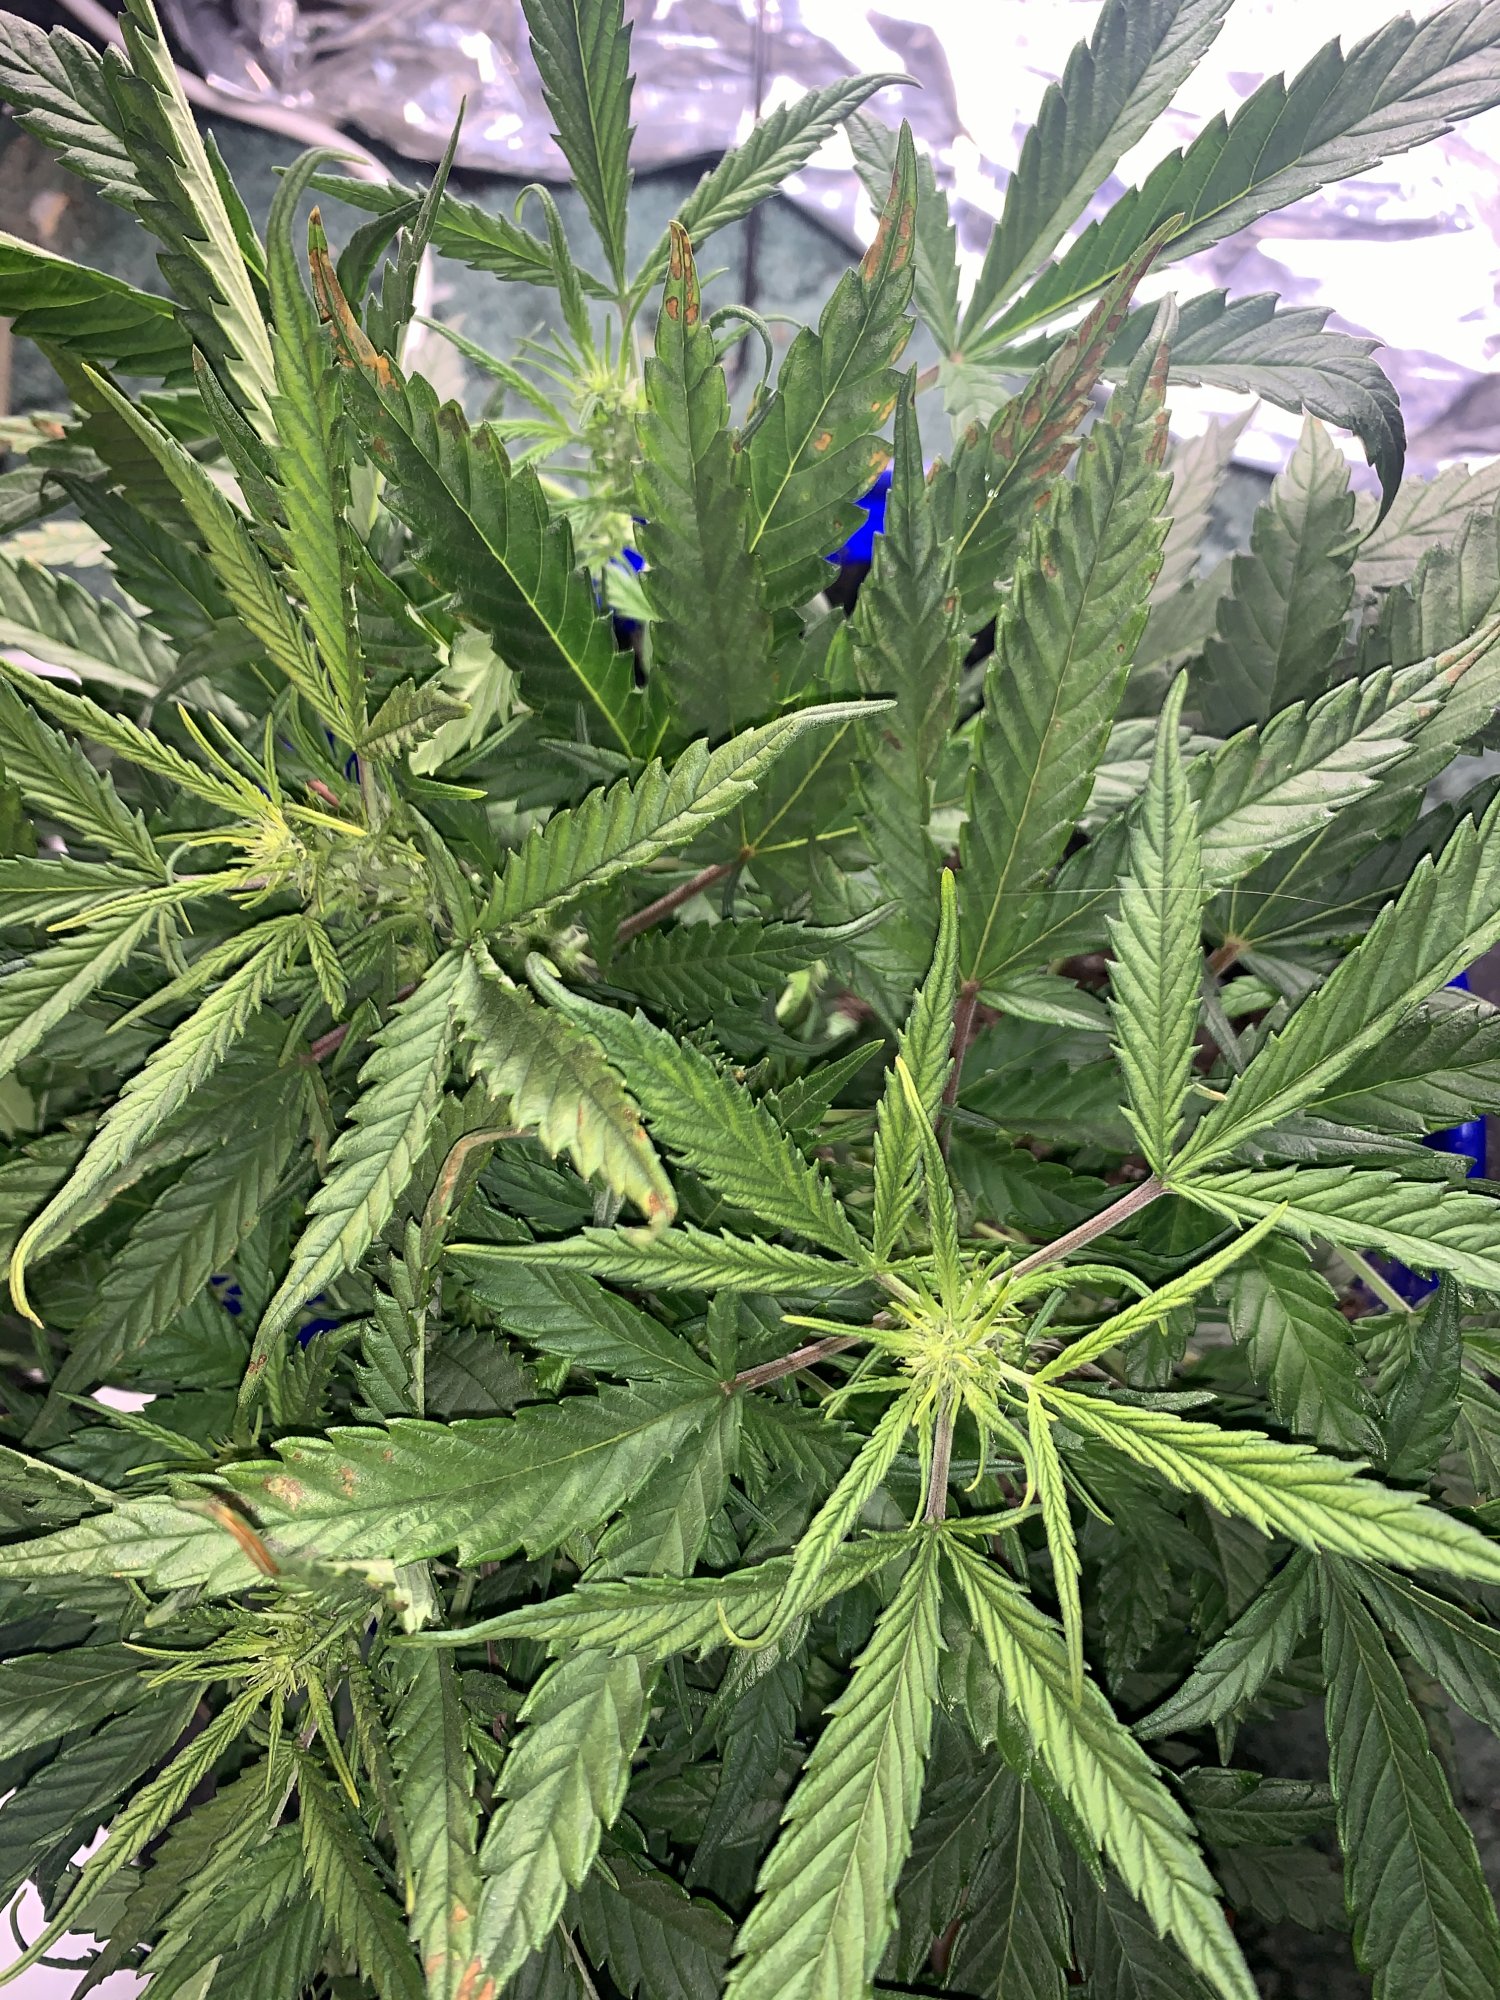 Needing some help first time ever growing anything lol 6